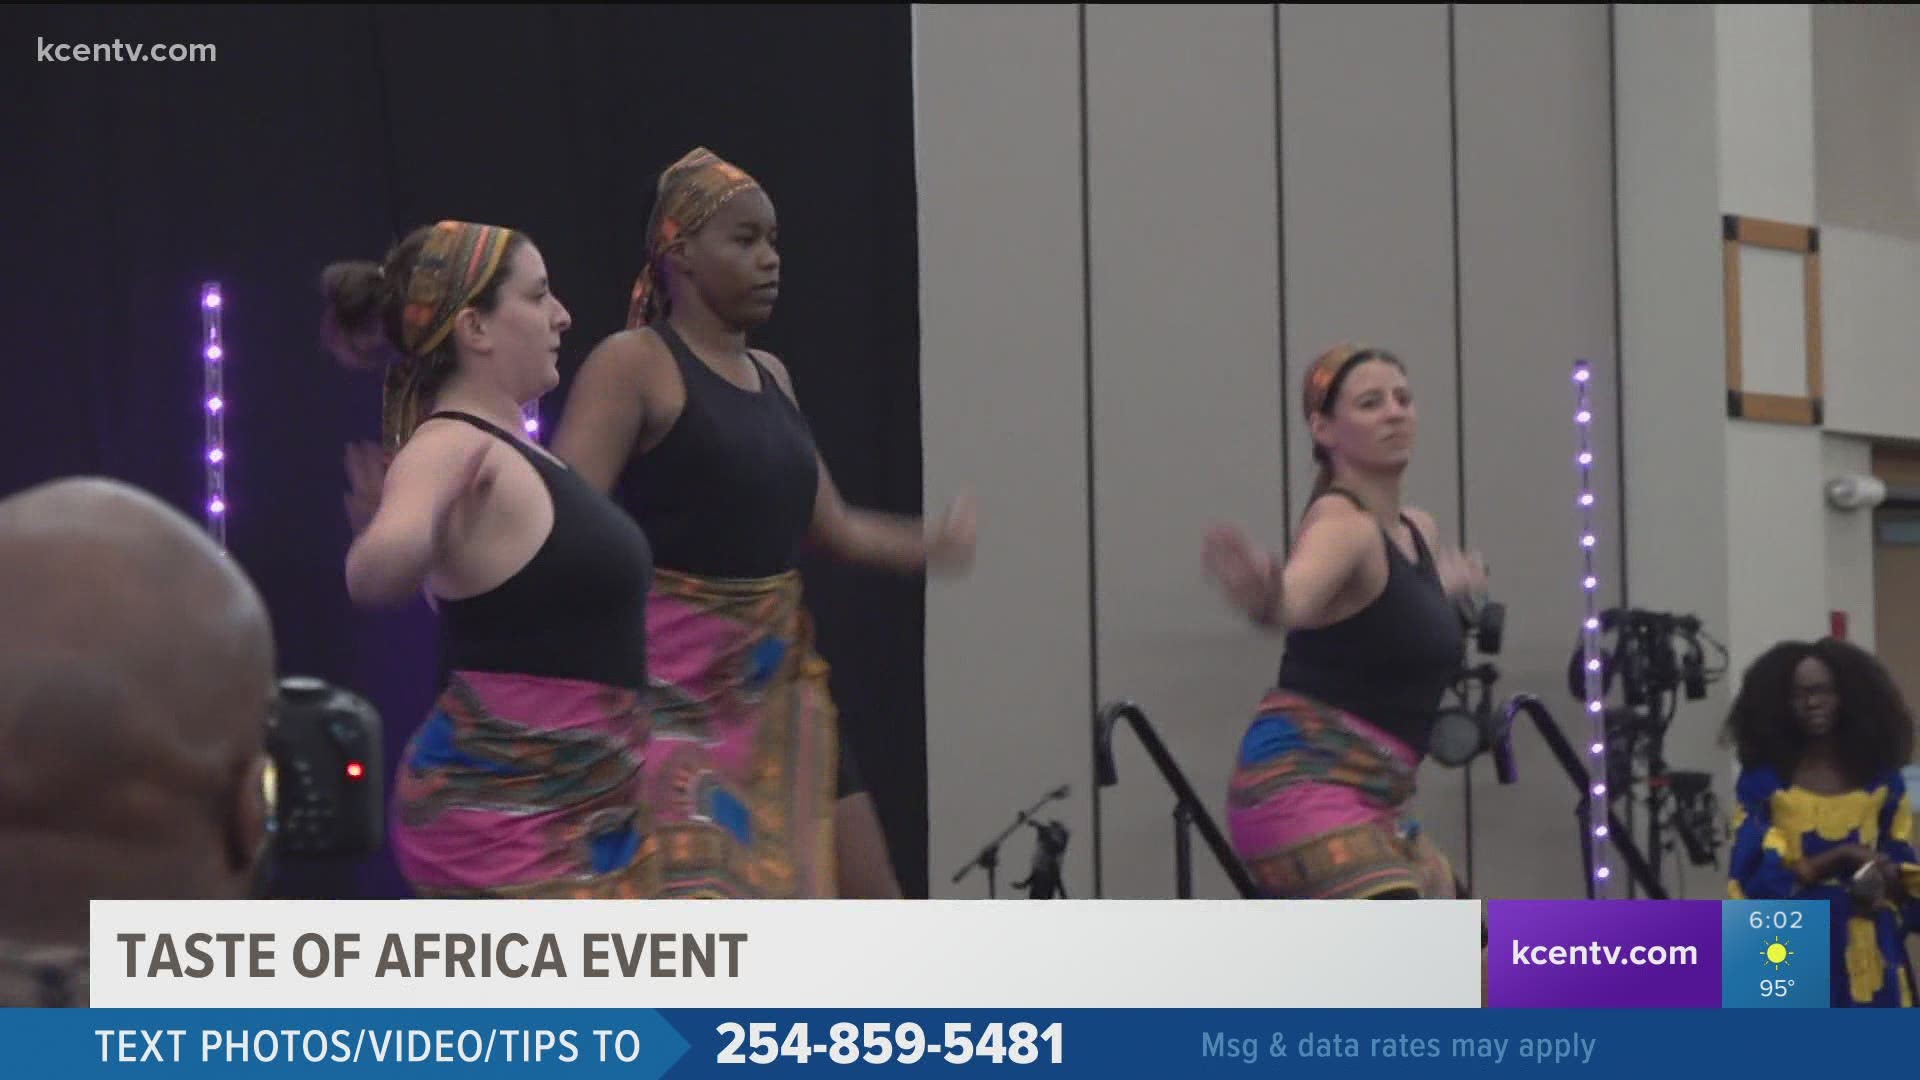 The event featured a variety of African food, fashion, art, music and more.